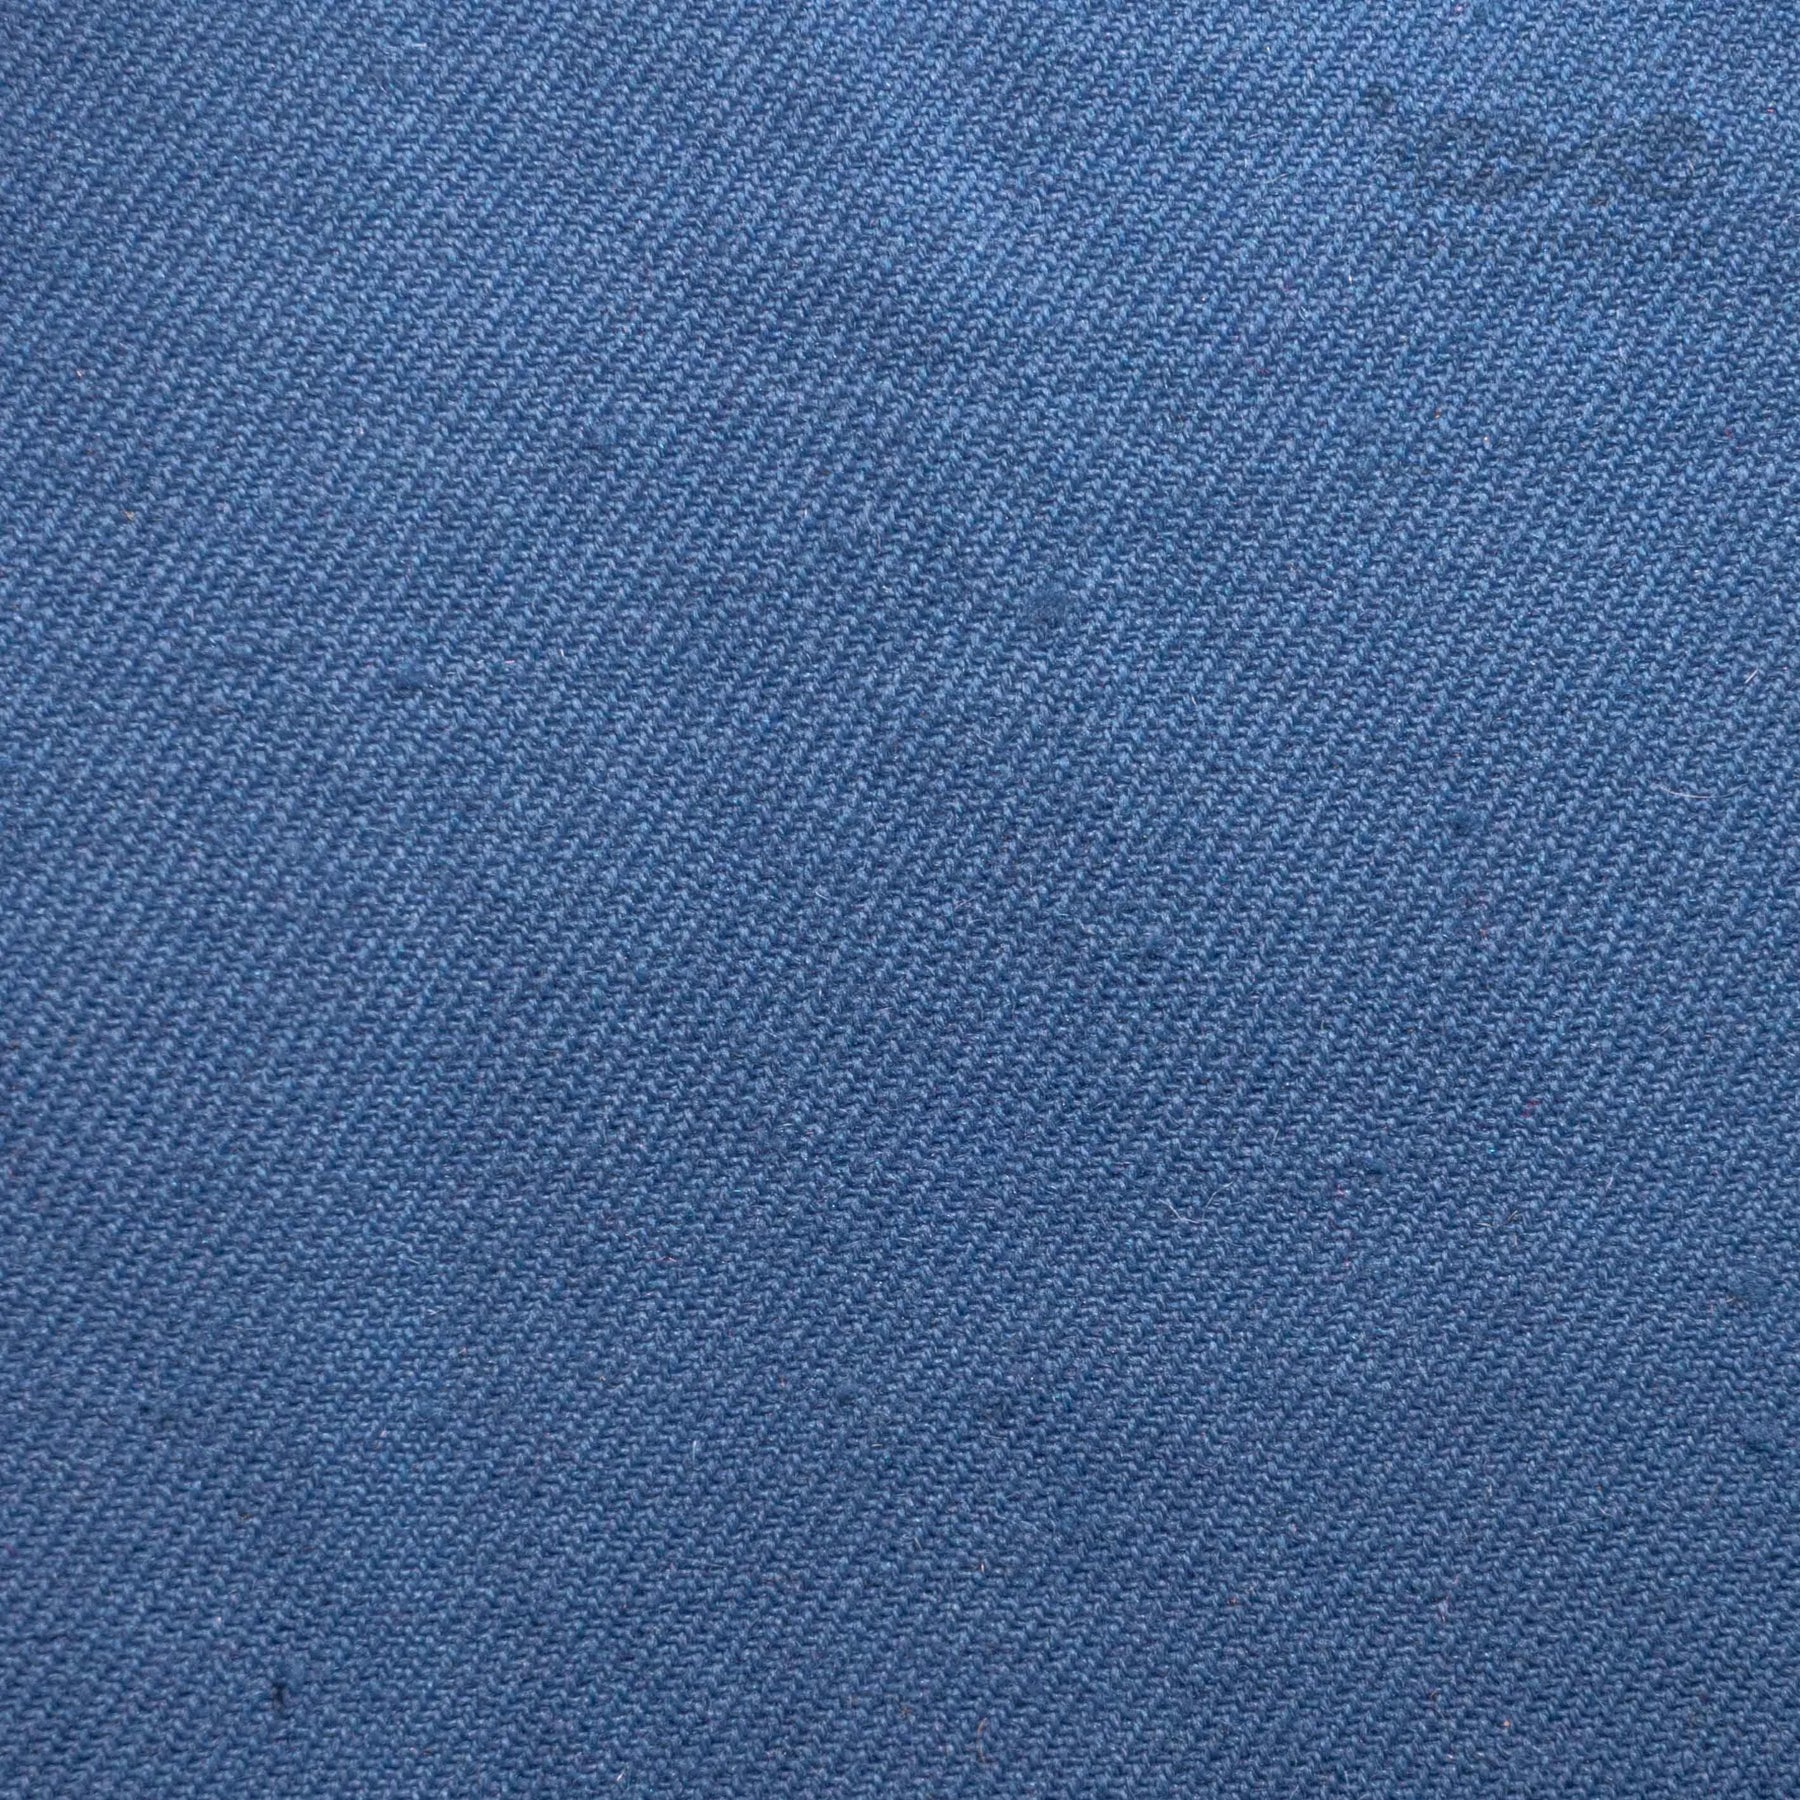 Plant-dyed wool fabric blue twill